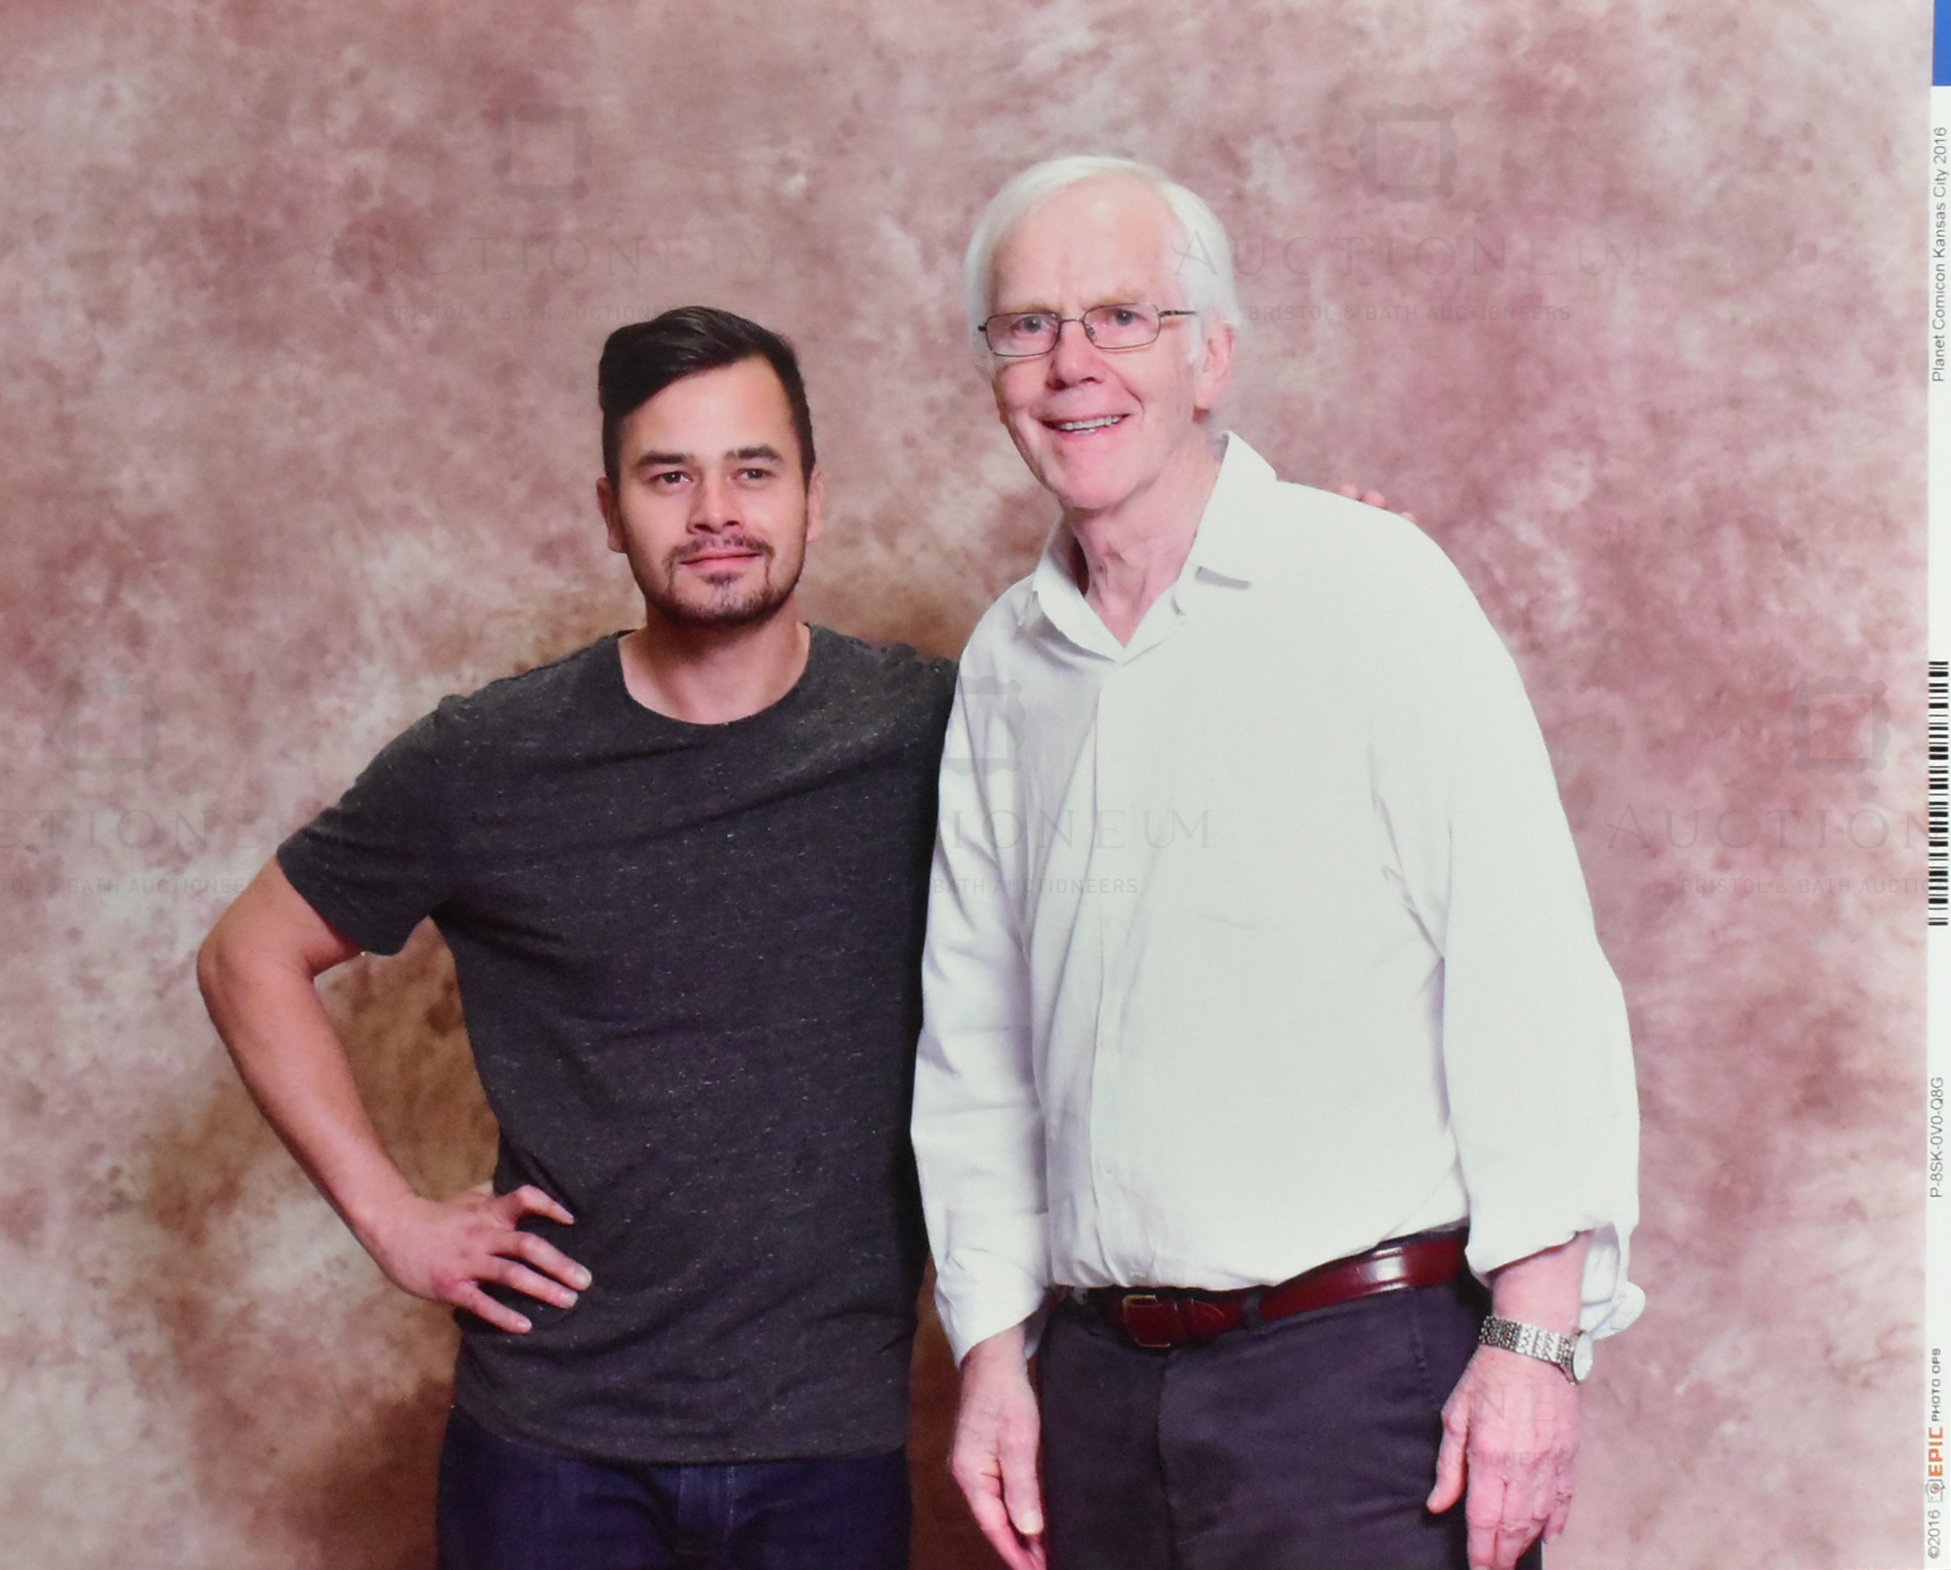 ESTATE OF JEREMY BULLOCH - STAR WARS - PERSONAL PHOTOGRAPH